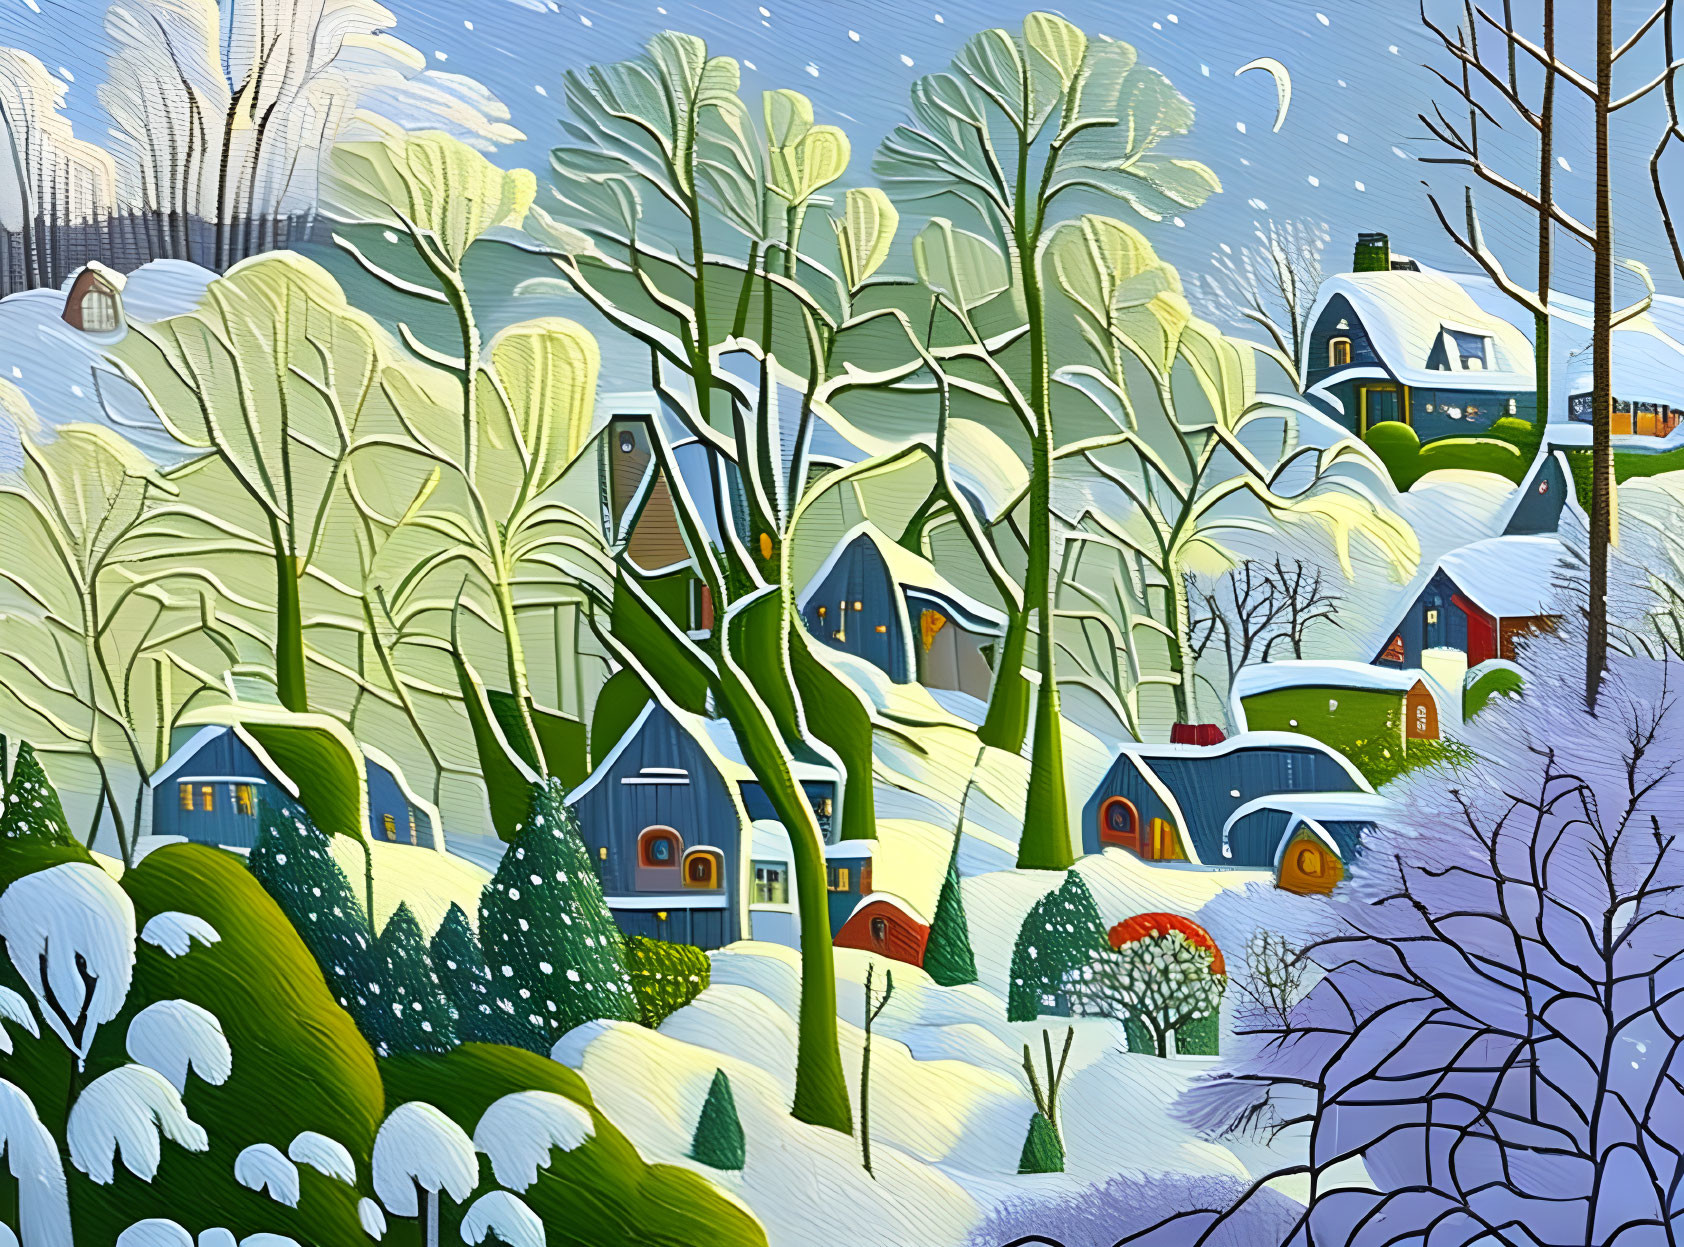 Vibrant painting of snowy village with trees and houses